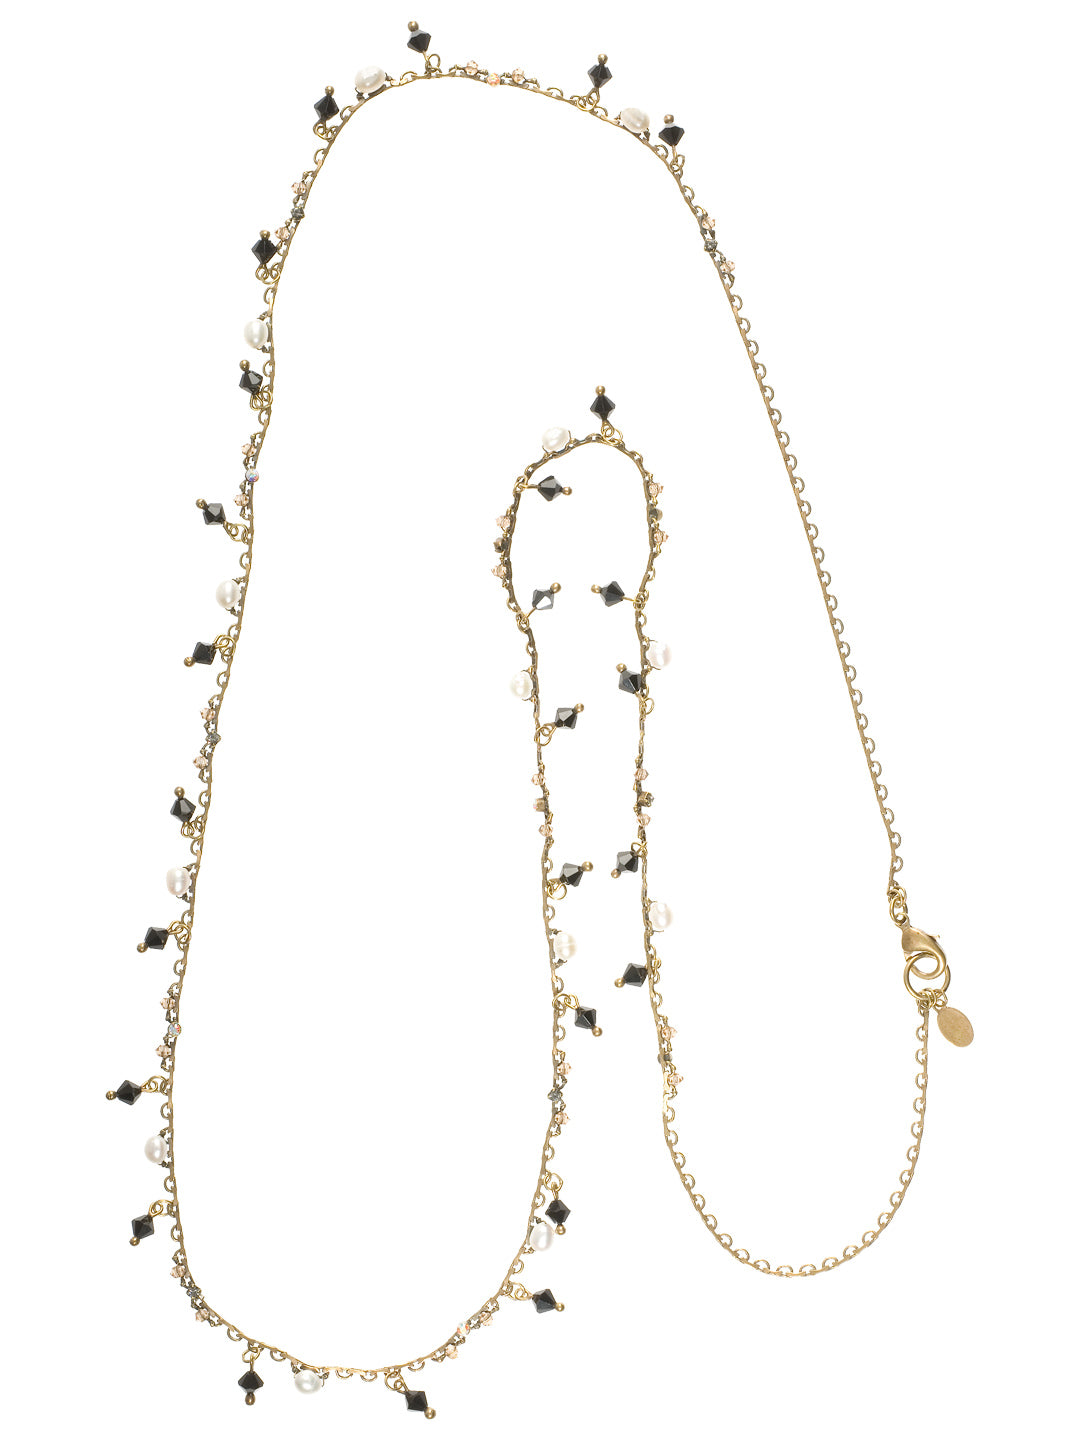 Elsa Long Necklace - NBU14AGEM - <p>The Elsa Long Necklace will go with any outfit. Layer it with your favorite necklaces to create the perfect look. From Sorrelli's Evening Moon collection in our Antique Gold-tone finish.</p>